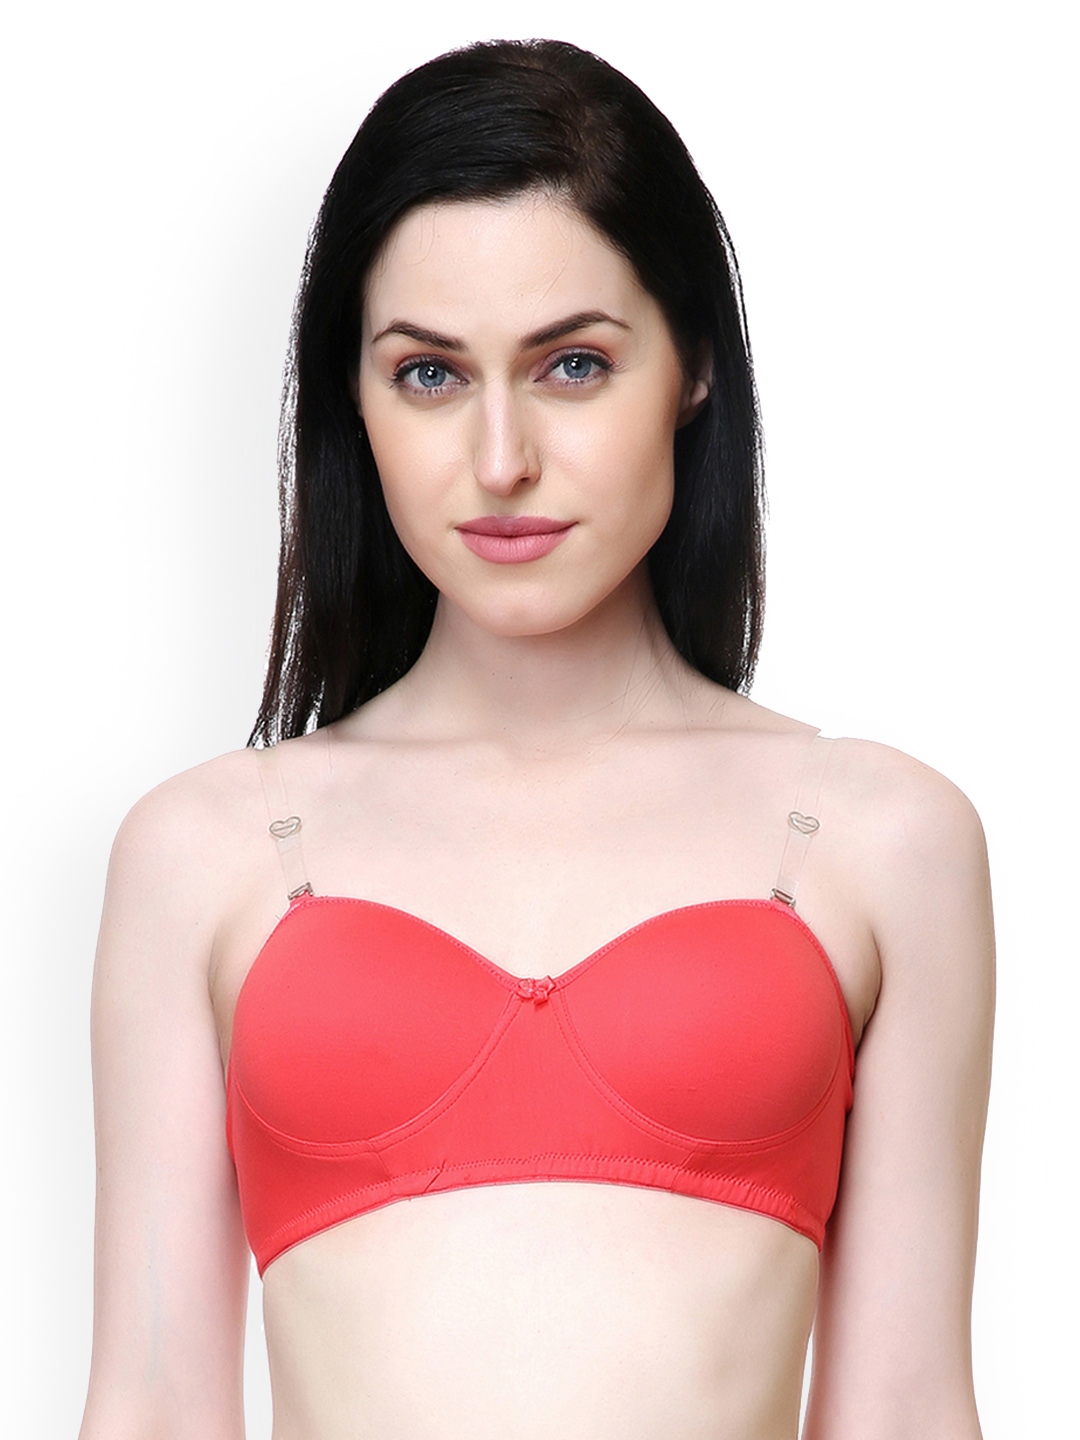 Buy Lady Lyka Non-Padded Non-Wired Full Cup Bra (White, 38B) at